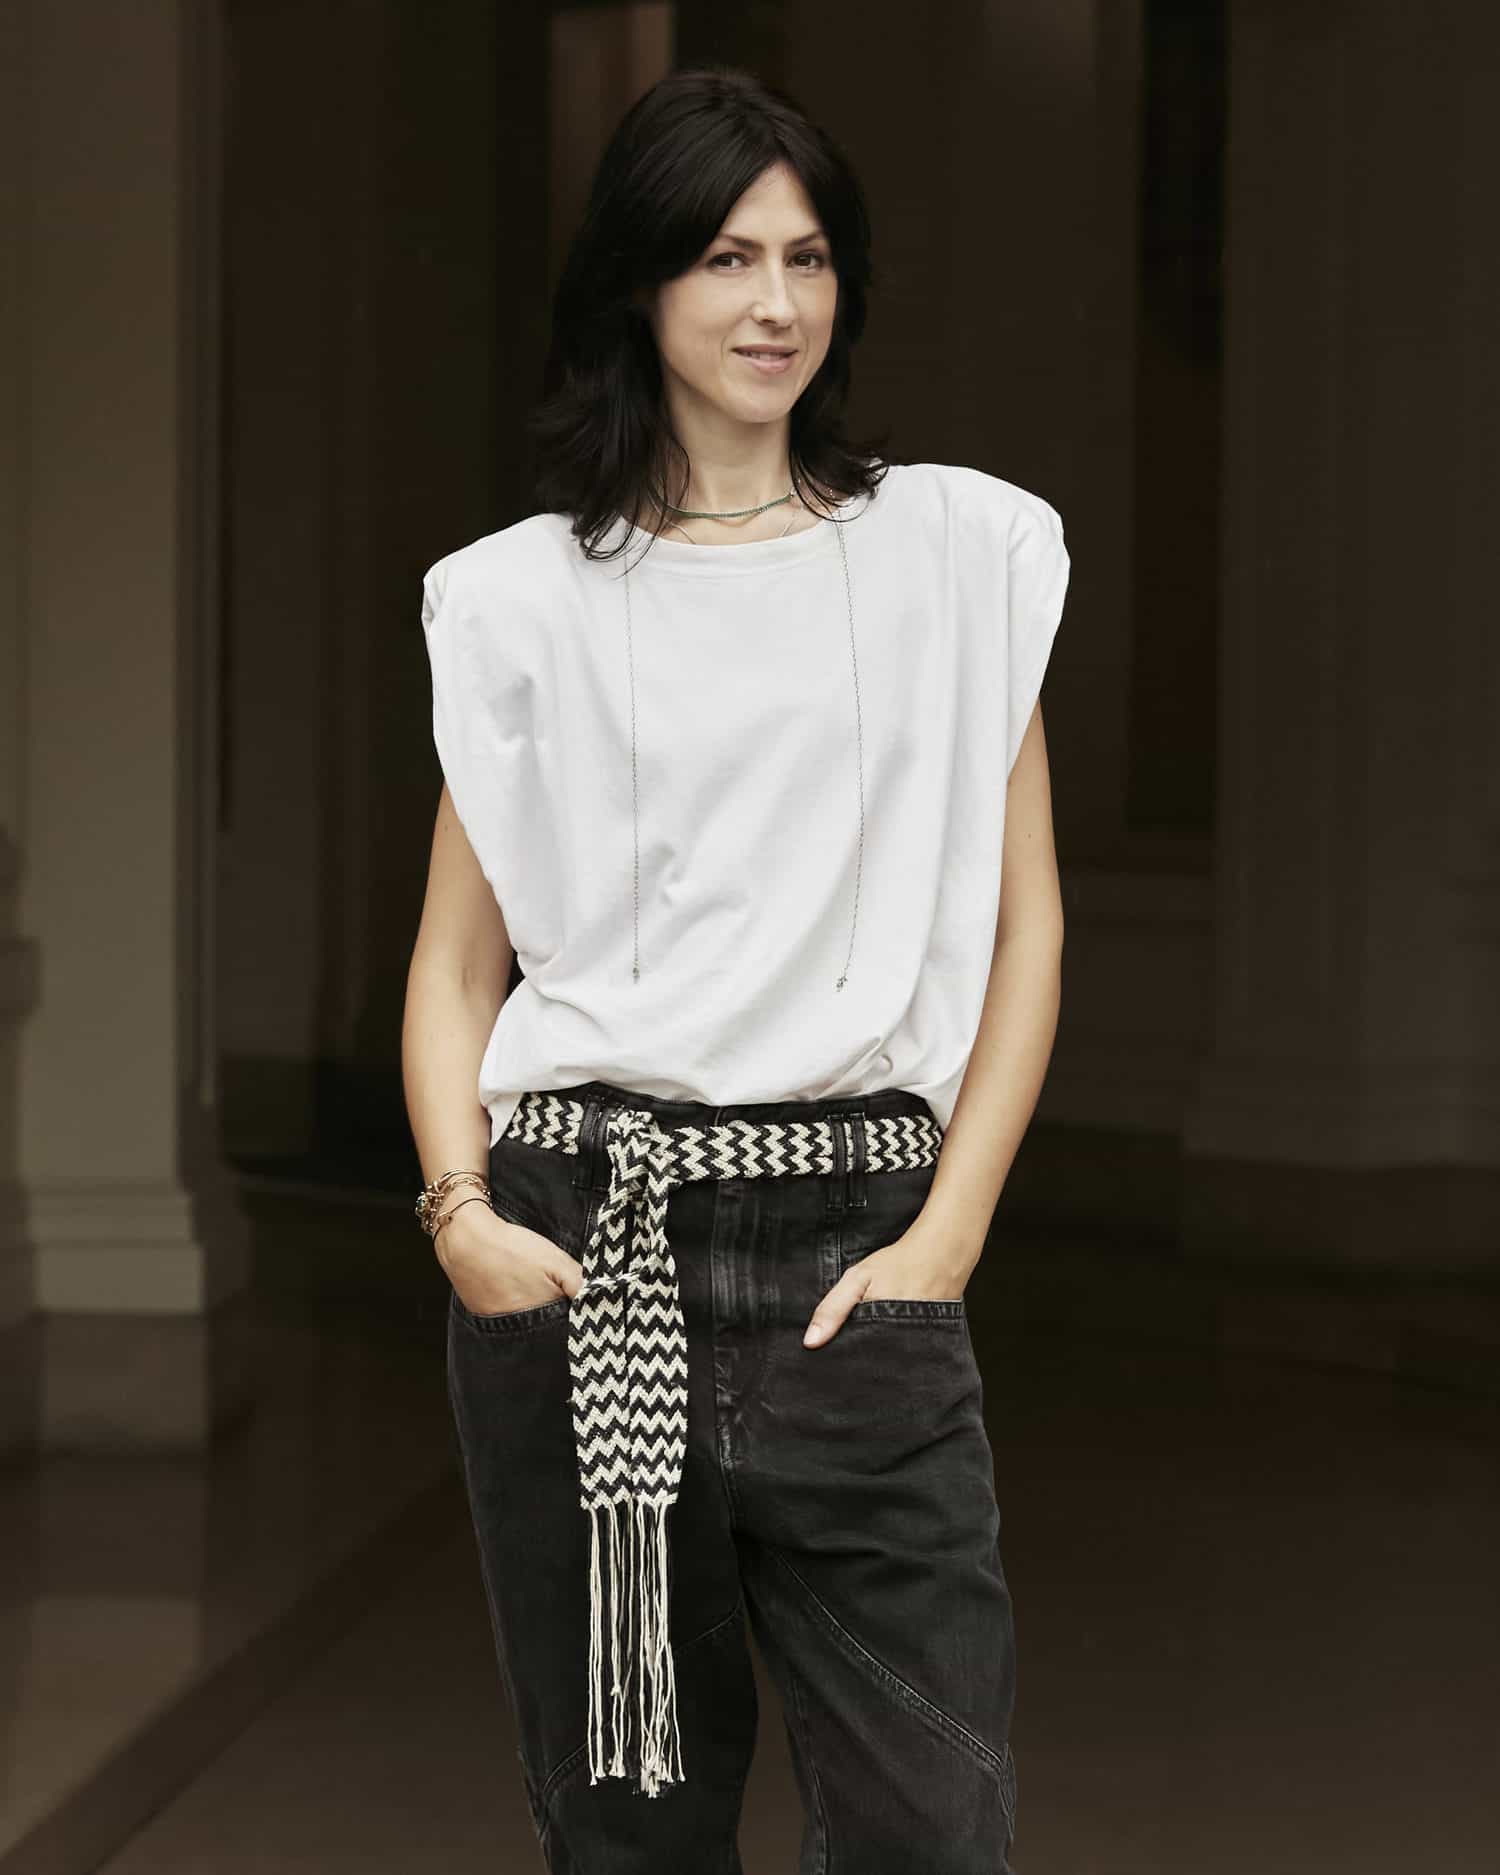 Daily News: Isabel Marant's New Designer, Hamish Bowles Is Condé